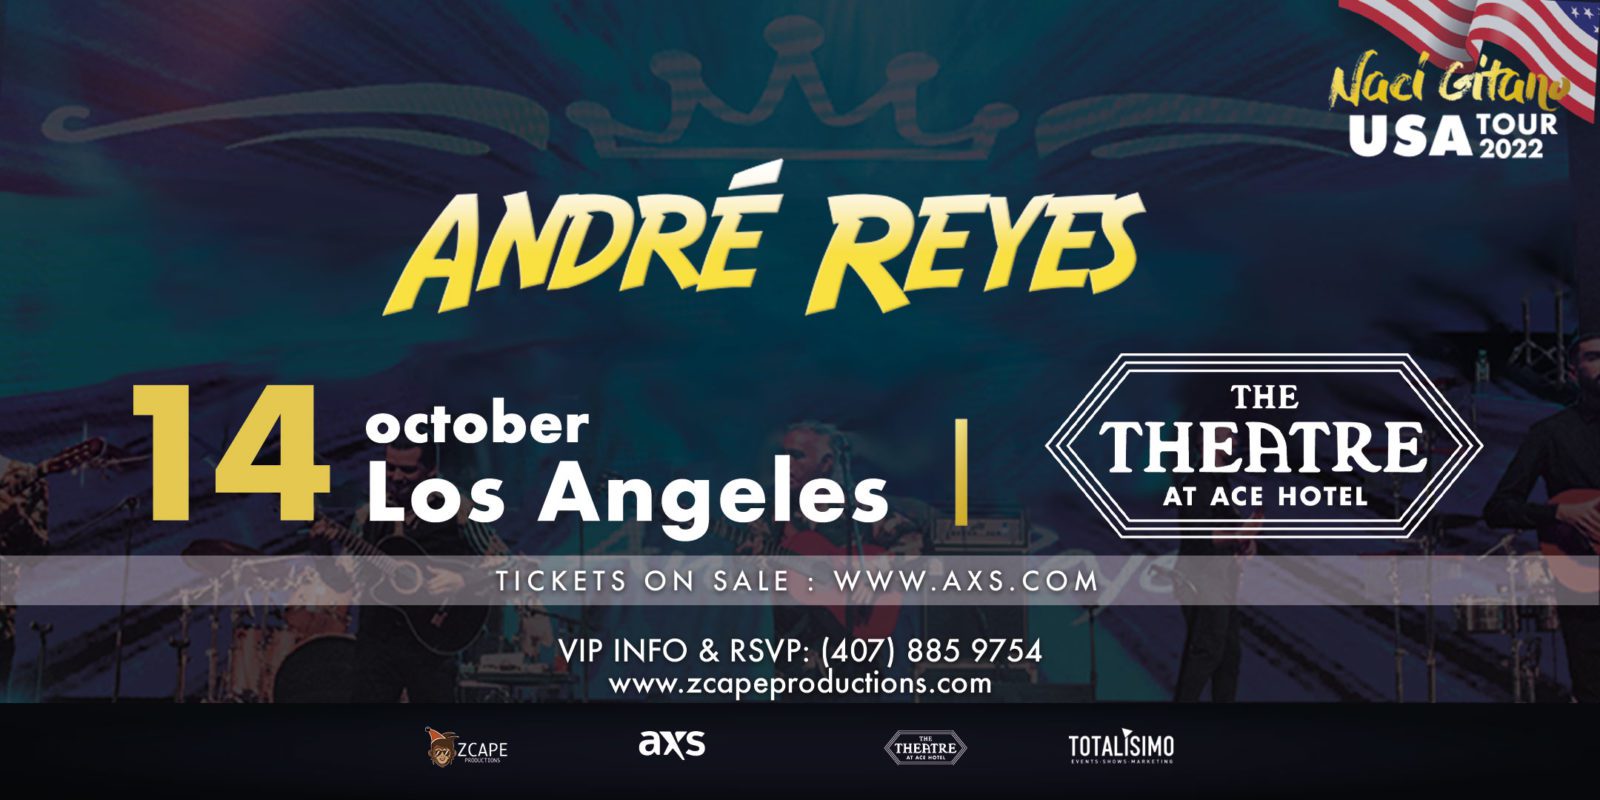 Andre Reyes promo